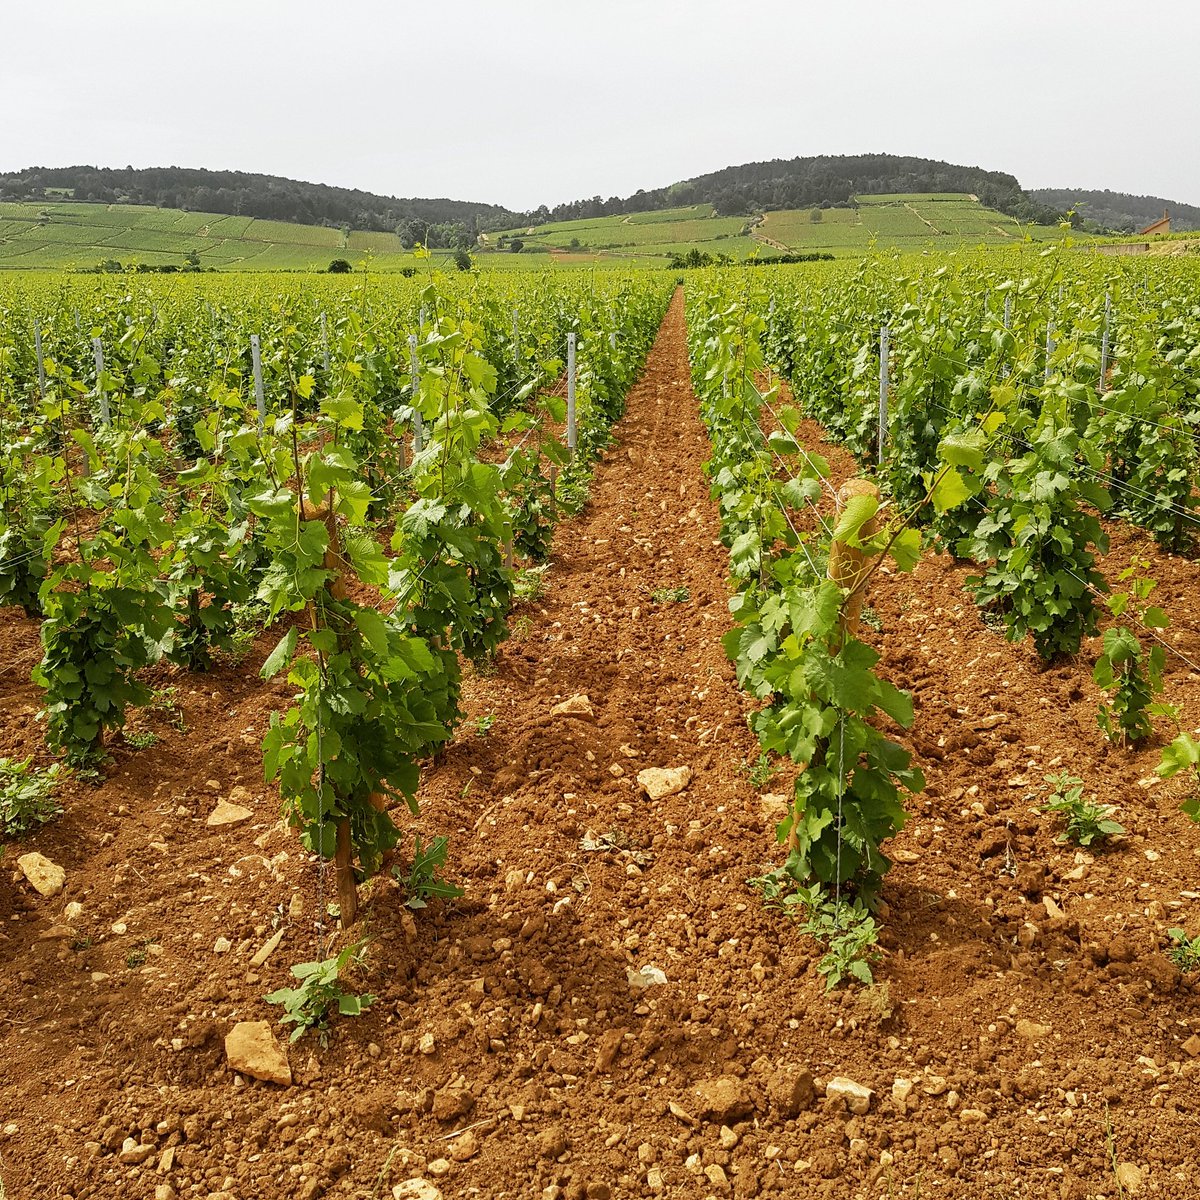 #beaune1ercru #Burgundy 3 year old vines with spring growth before the first cut. Tender green #pinotnoir